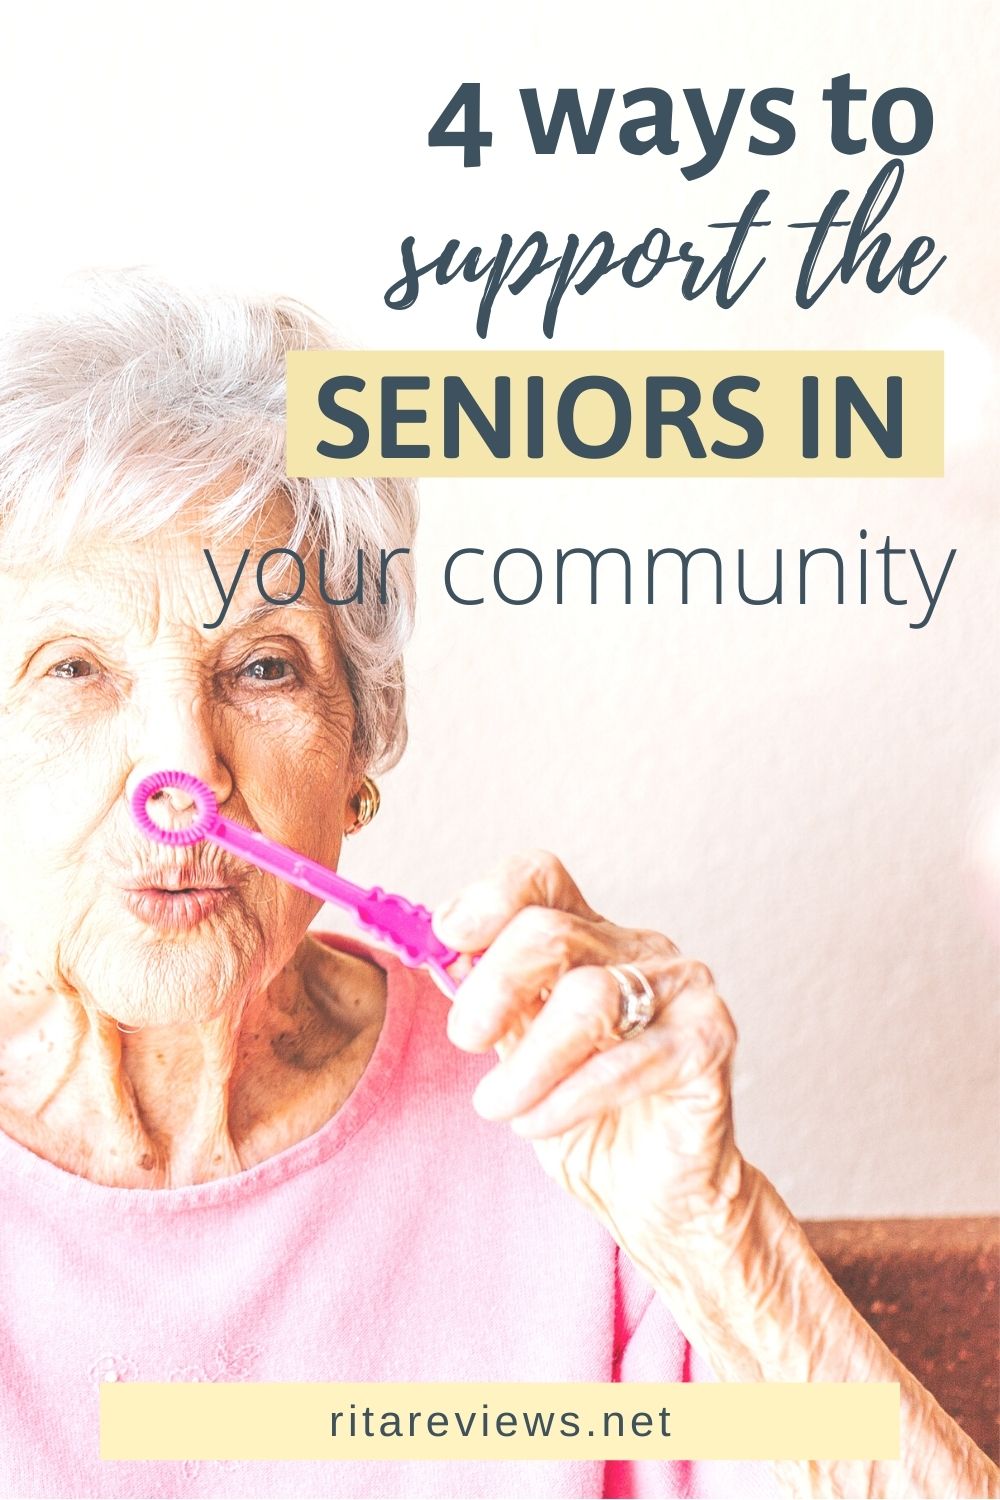 4 Ways to Support the Seniors in Your Community